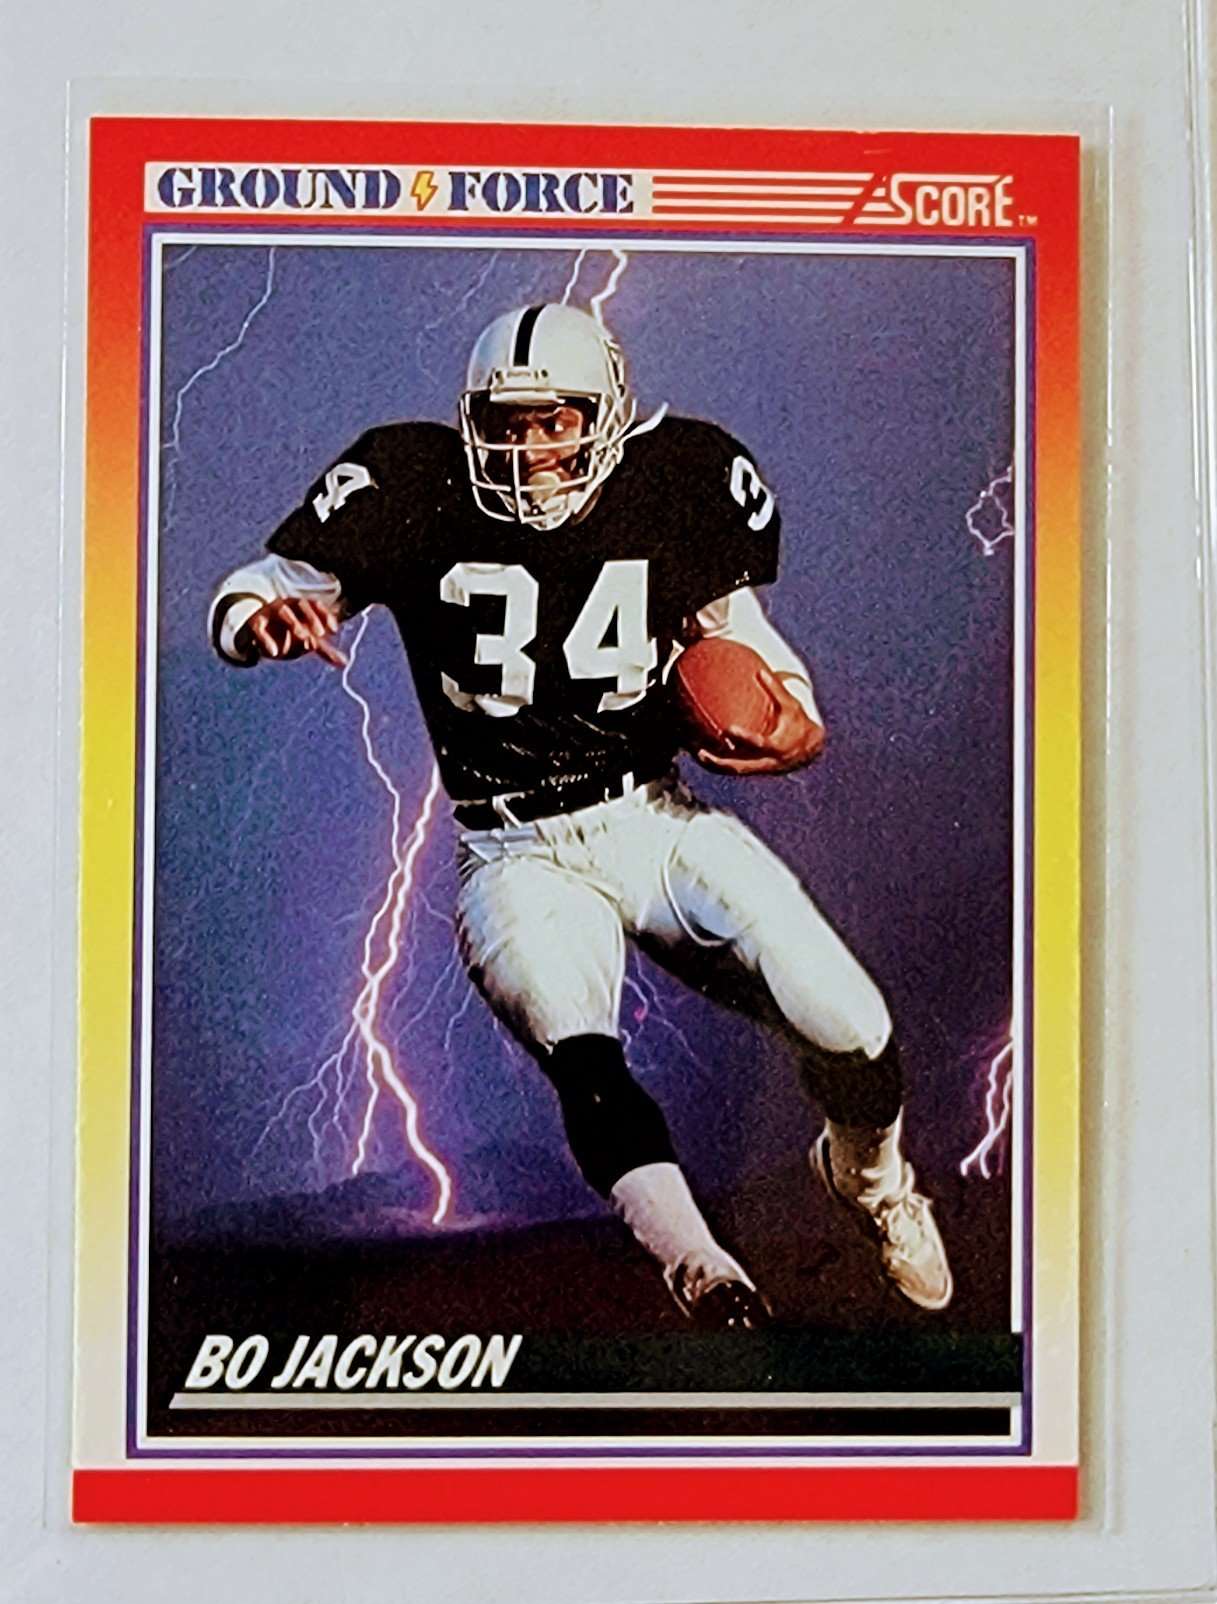 1990 Score Bo Jackson Ground Force Insert Football Card AVM1 simple Xclusive Collectibles   